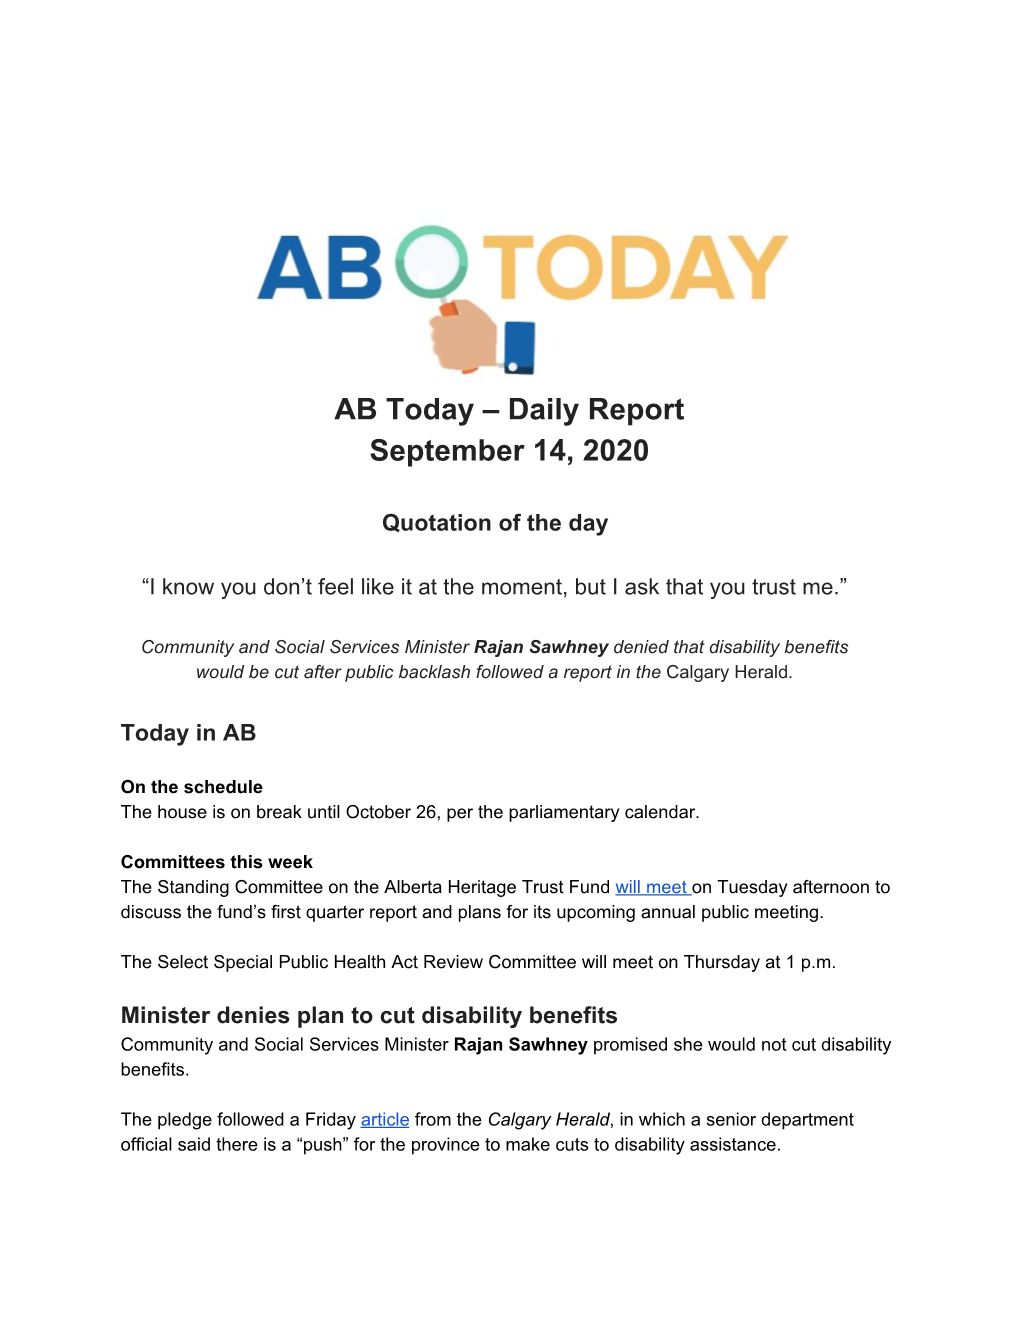 AB Today – Daily Report September 14, 2020